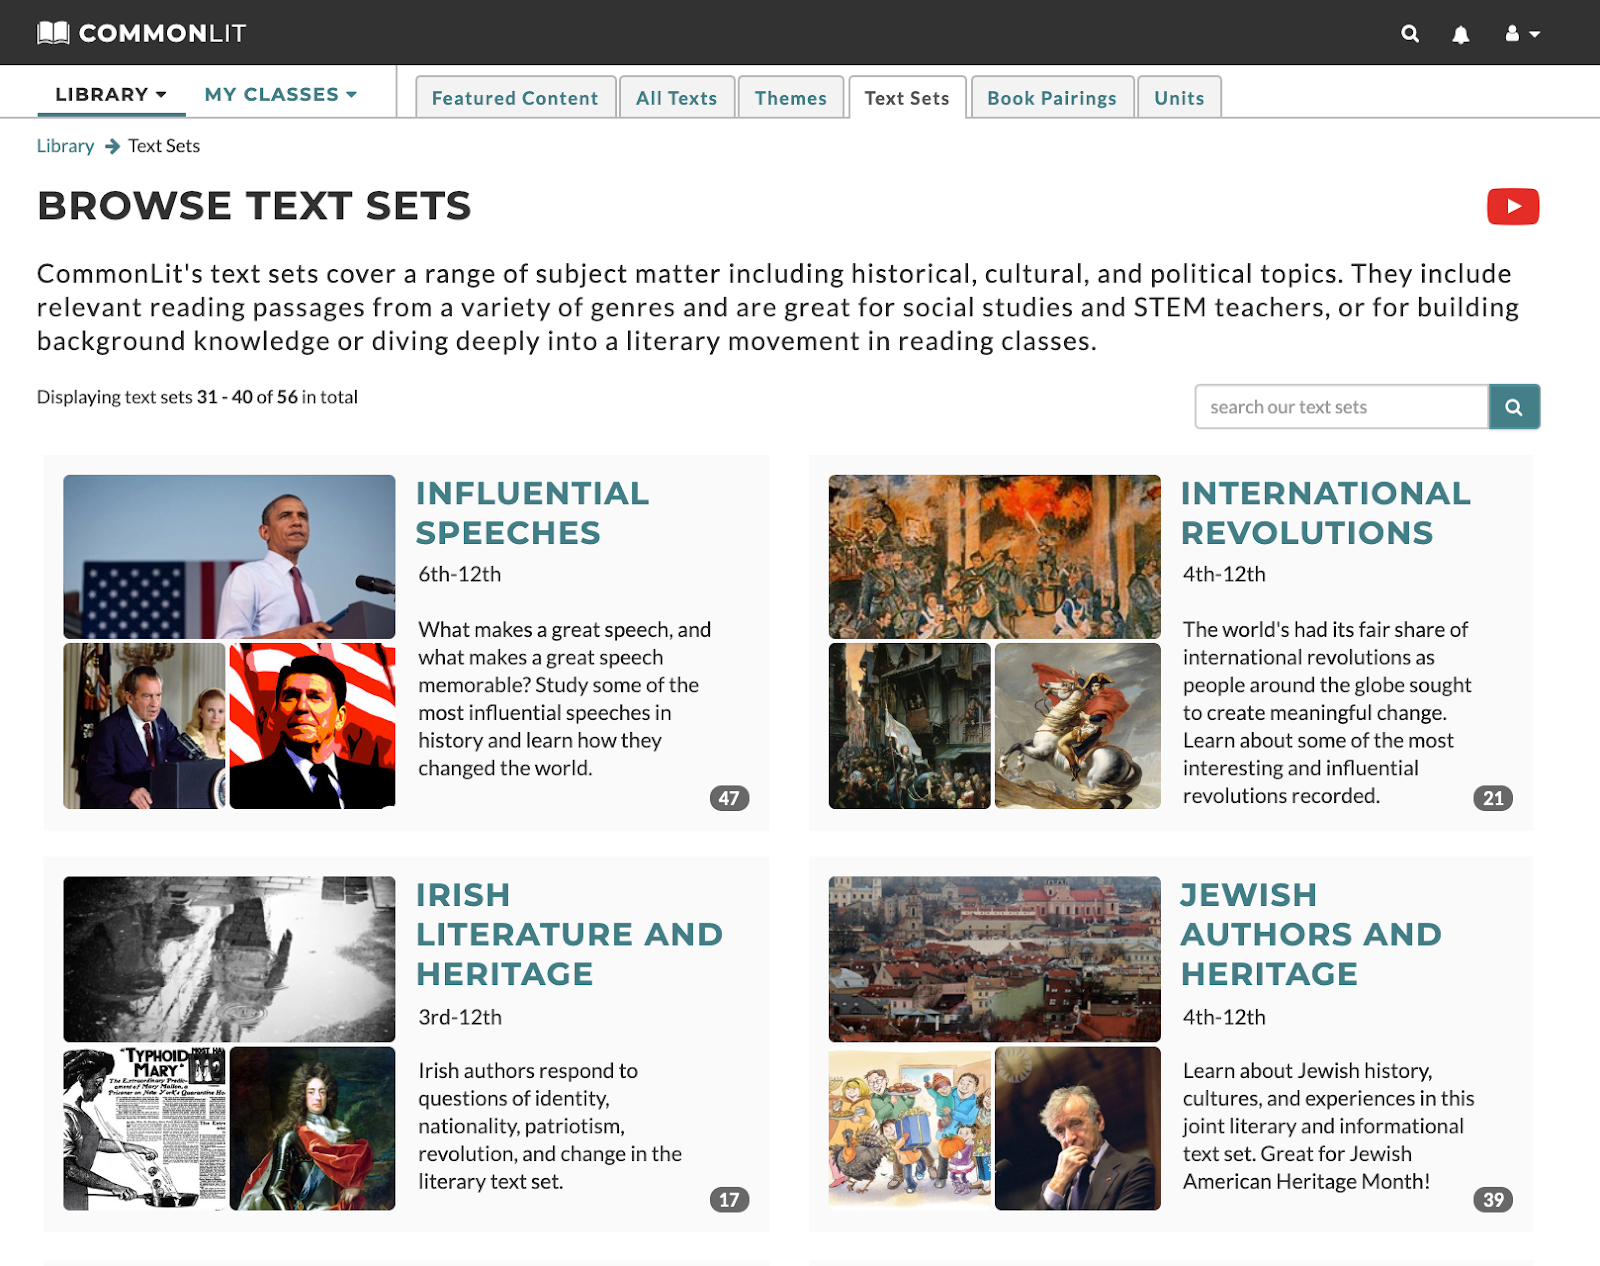 The Browse Text Sets page of the CommonLit library.